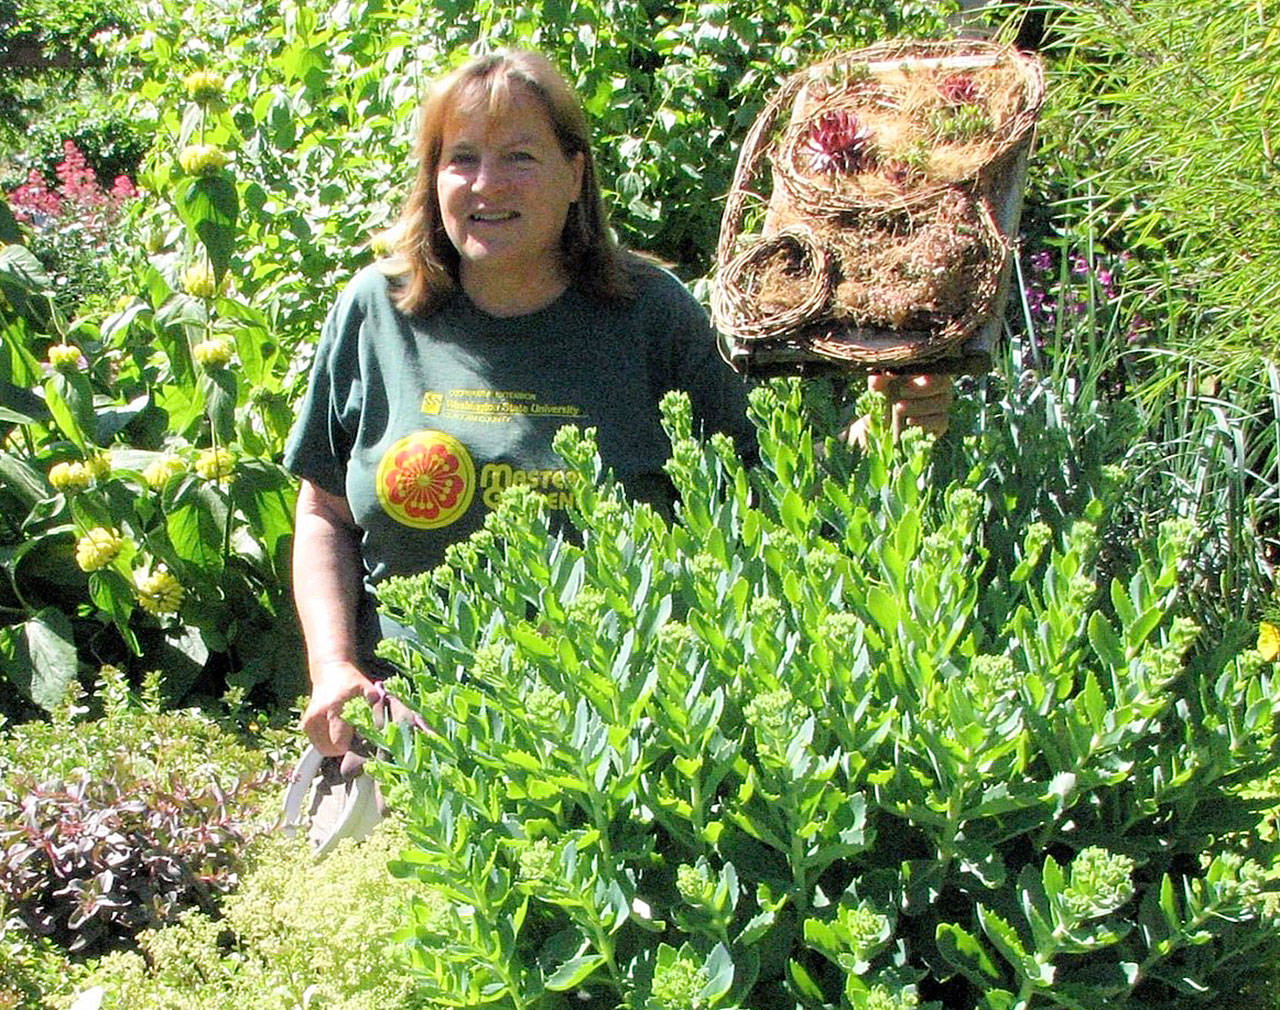 Clallam County Master Gardener Susan Kalmar discusses simple drip irrigation systems in her Green Thumbs Garden Tips Zoom presentation on June 25. Photo courtesy of Susan Kalmar